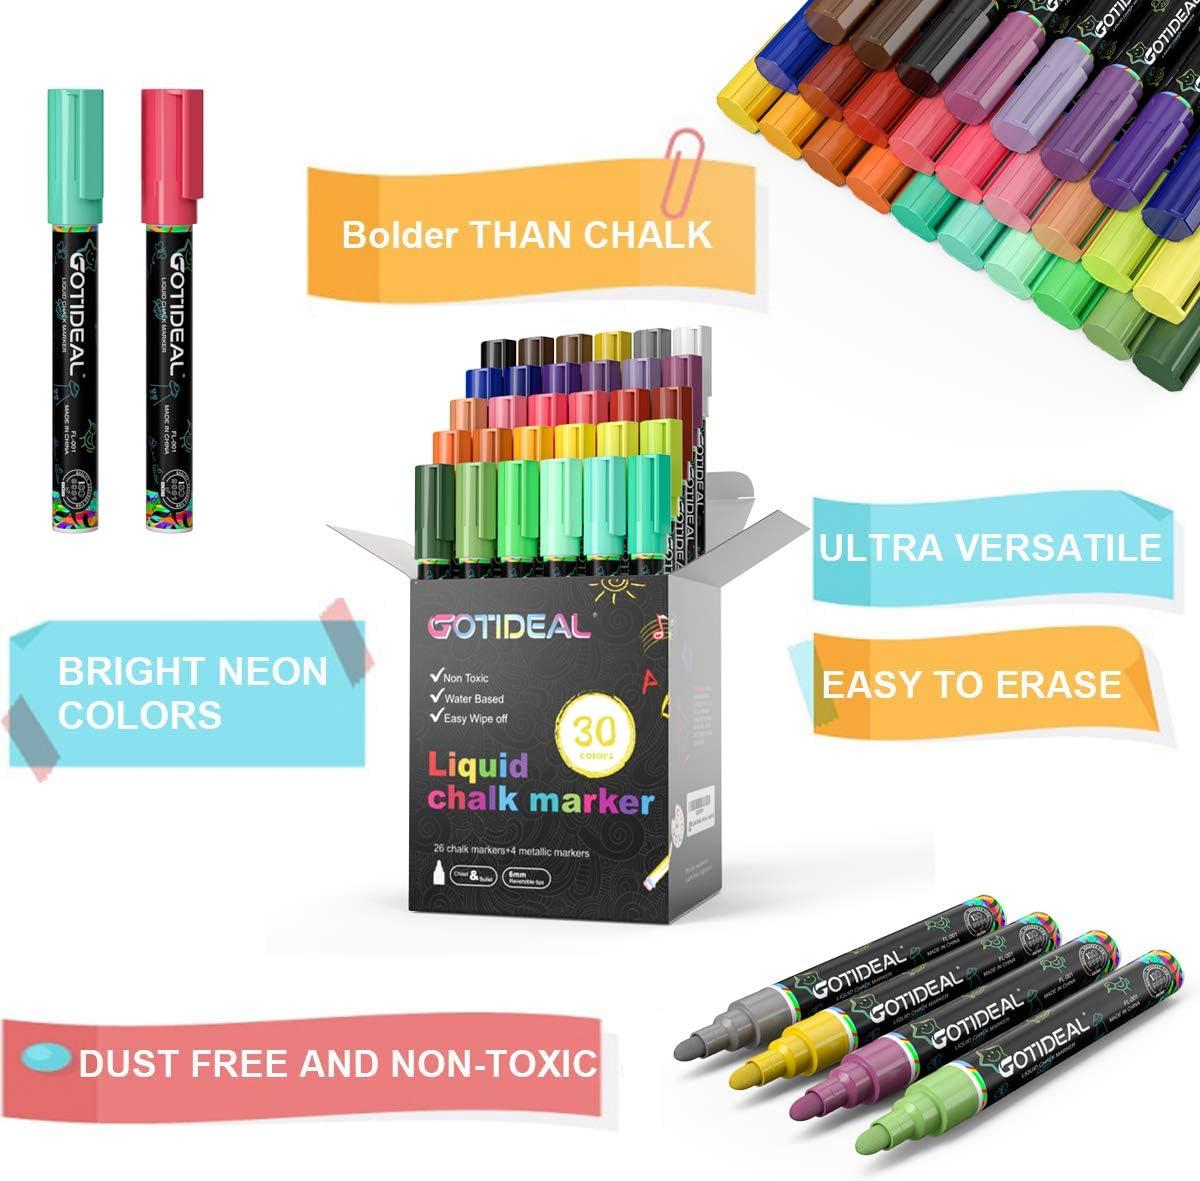 GOTIDEAL Liquid Chalk Markers, 30 colors Premium Window Chalkboard Neon Pens,  Including 4 Metallic Colors, Painting and Drawing for Kids and Adults,  Bistro & Restaurant, Wet Erase - Reversible Tip